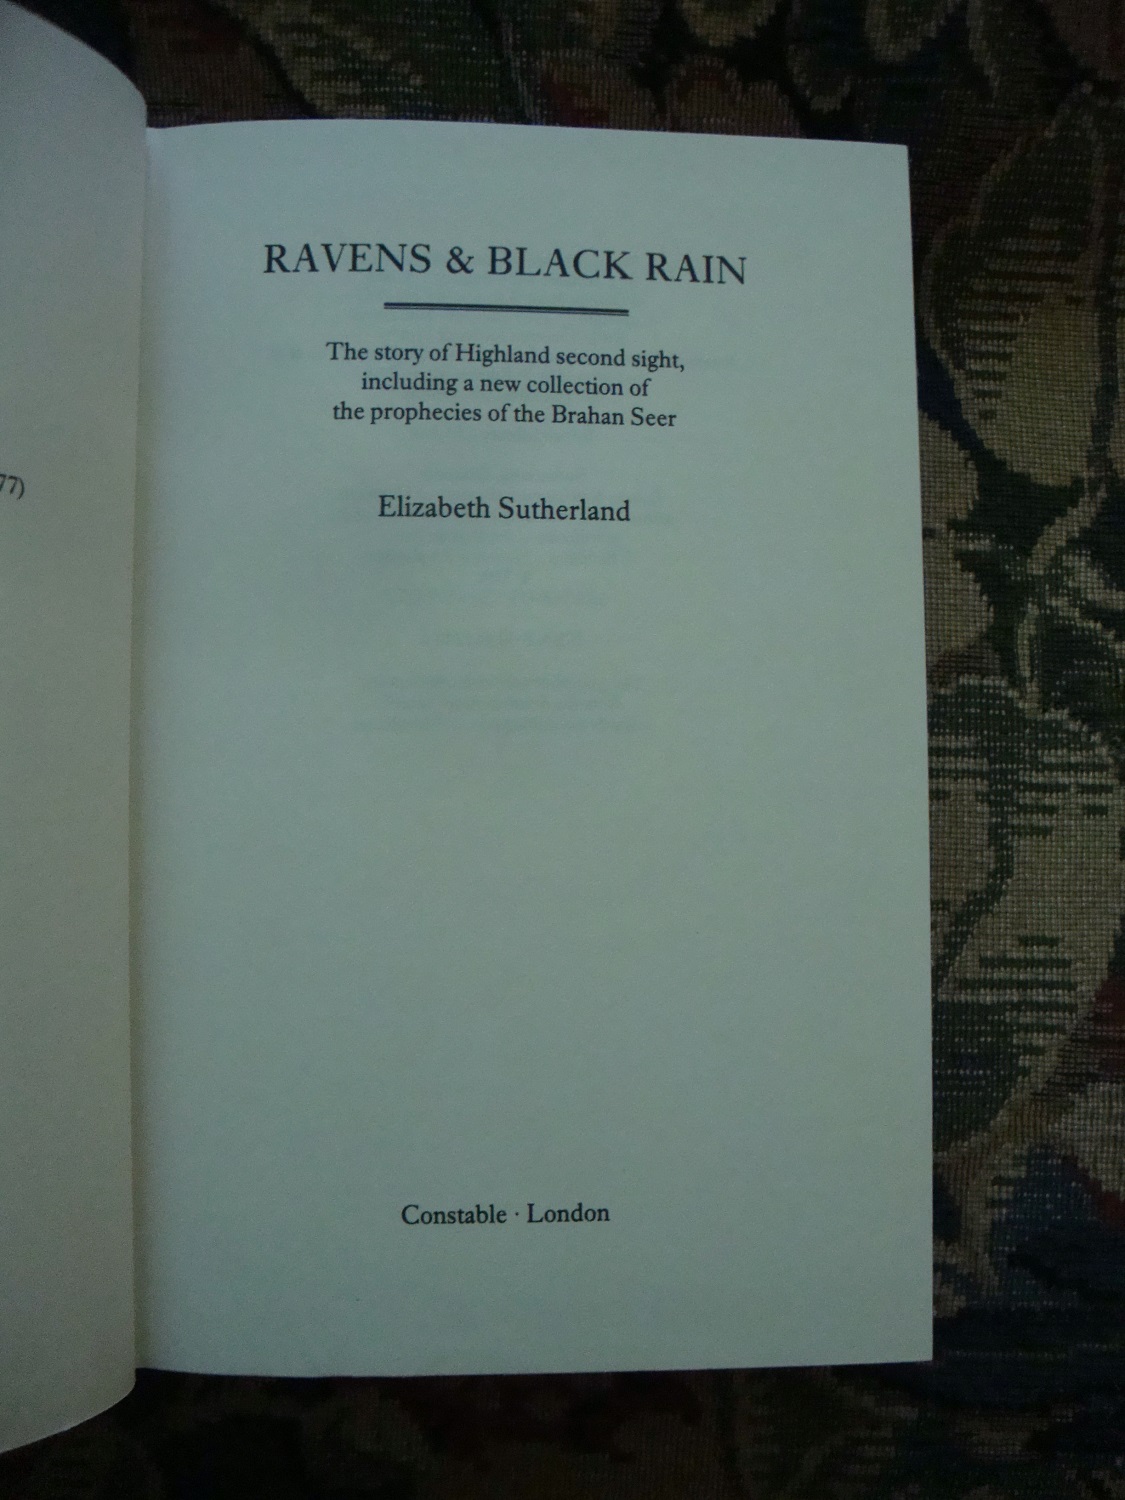 Ravens and Black Rain: The Story of Highland Second Sight, including a ...